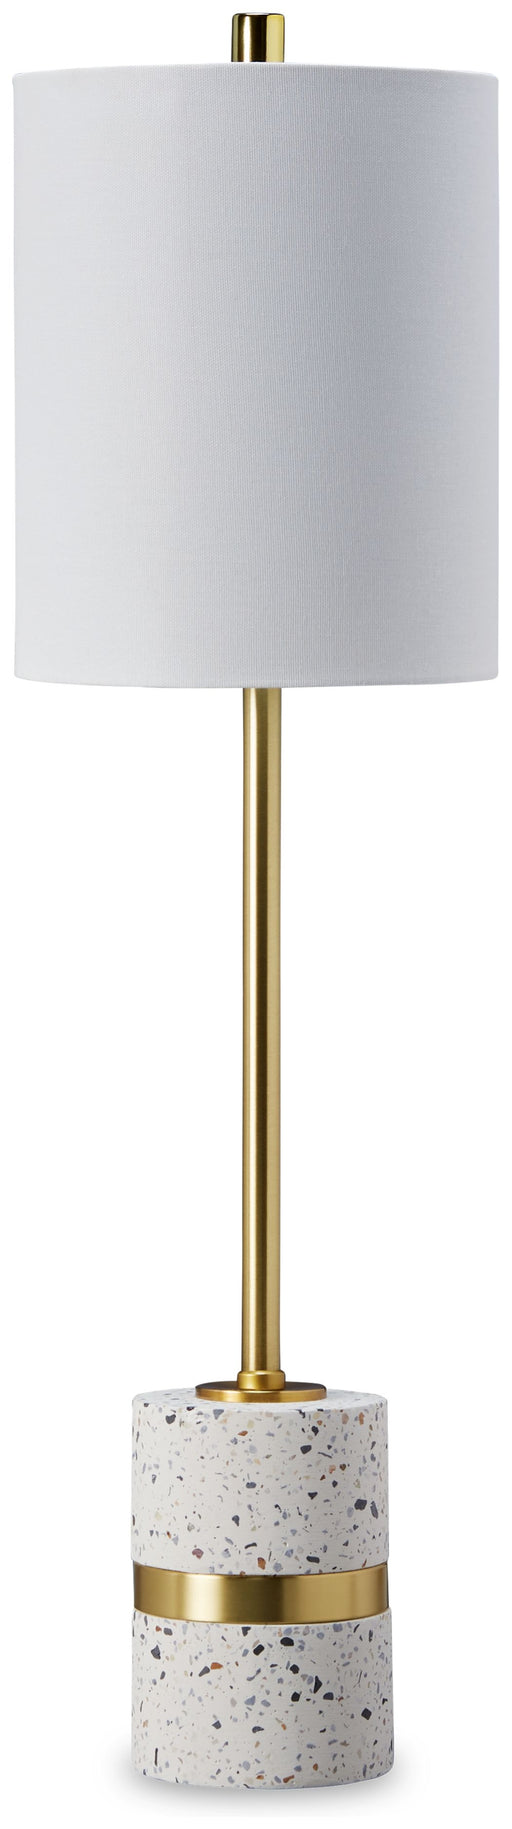 Maywick - White - Metal Table Lamp Unique Piece Furniture